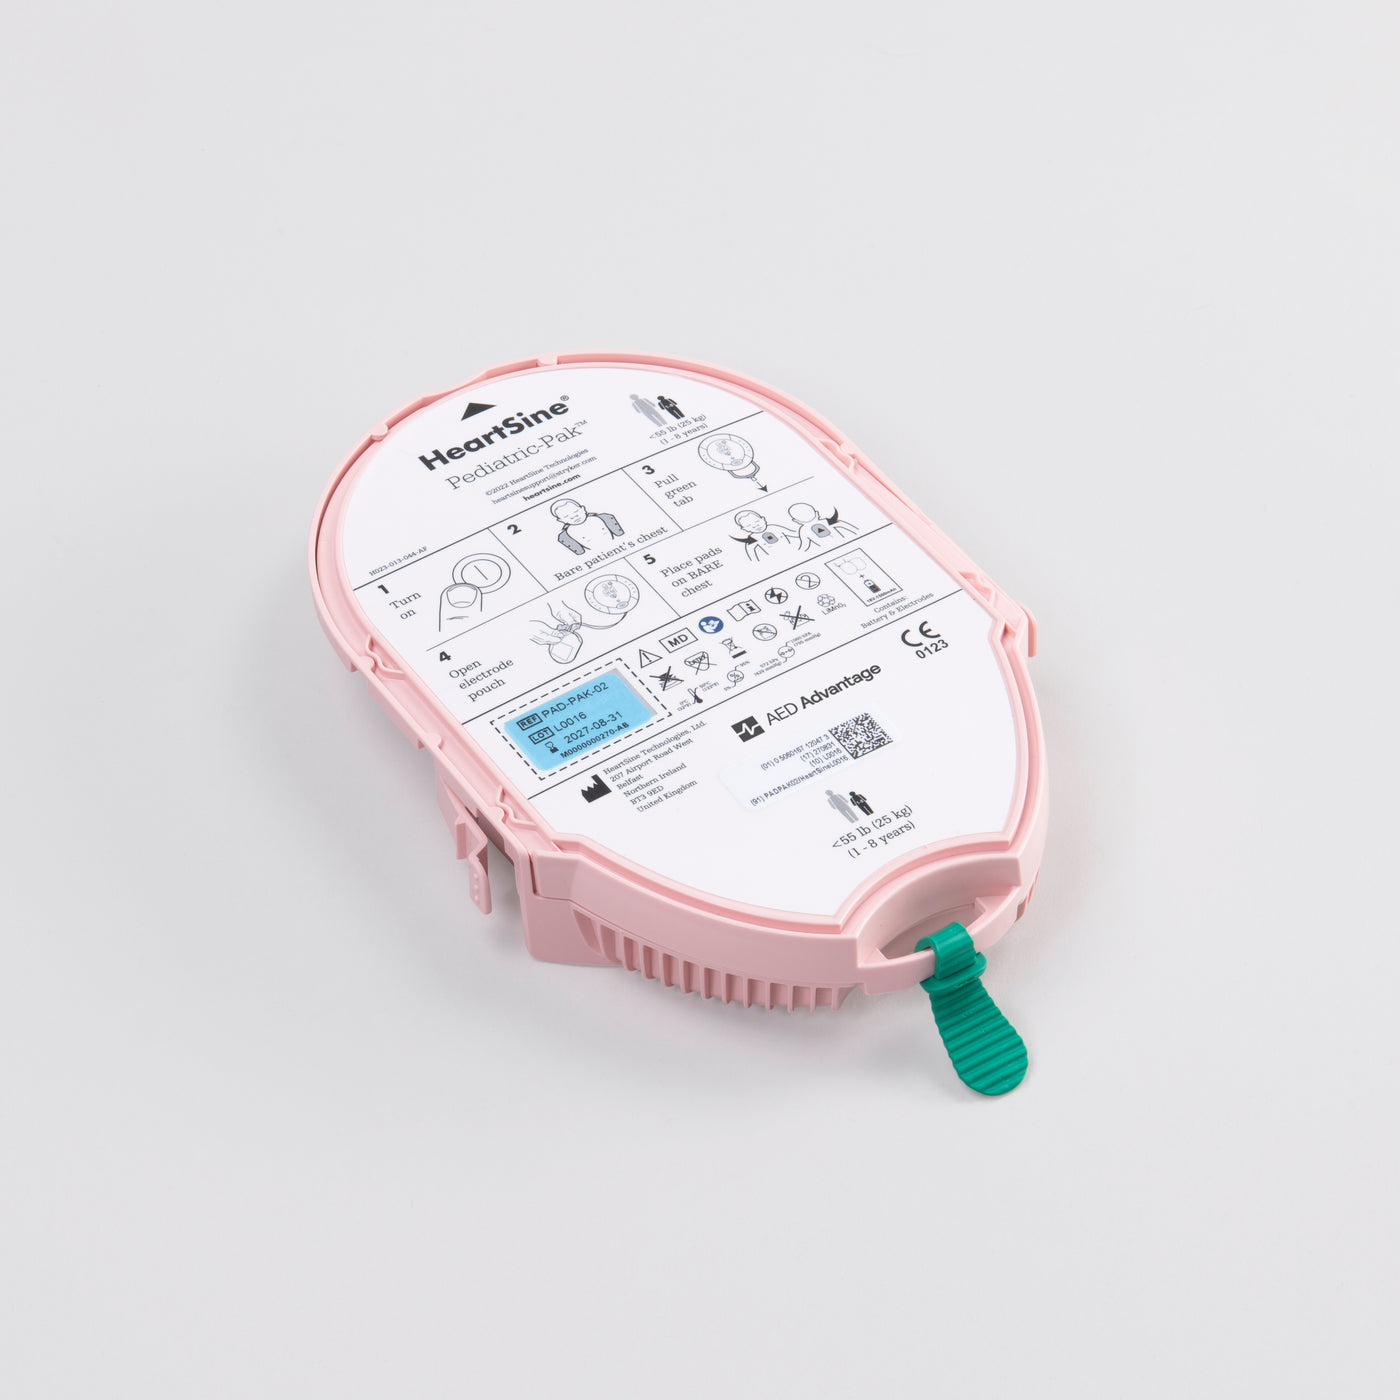 Pink pediatric pads and battery cartridge for the HeartSine defibrillator